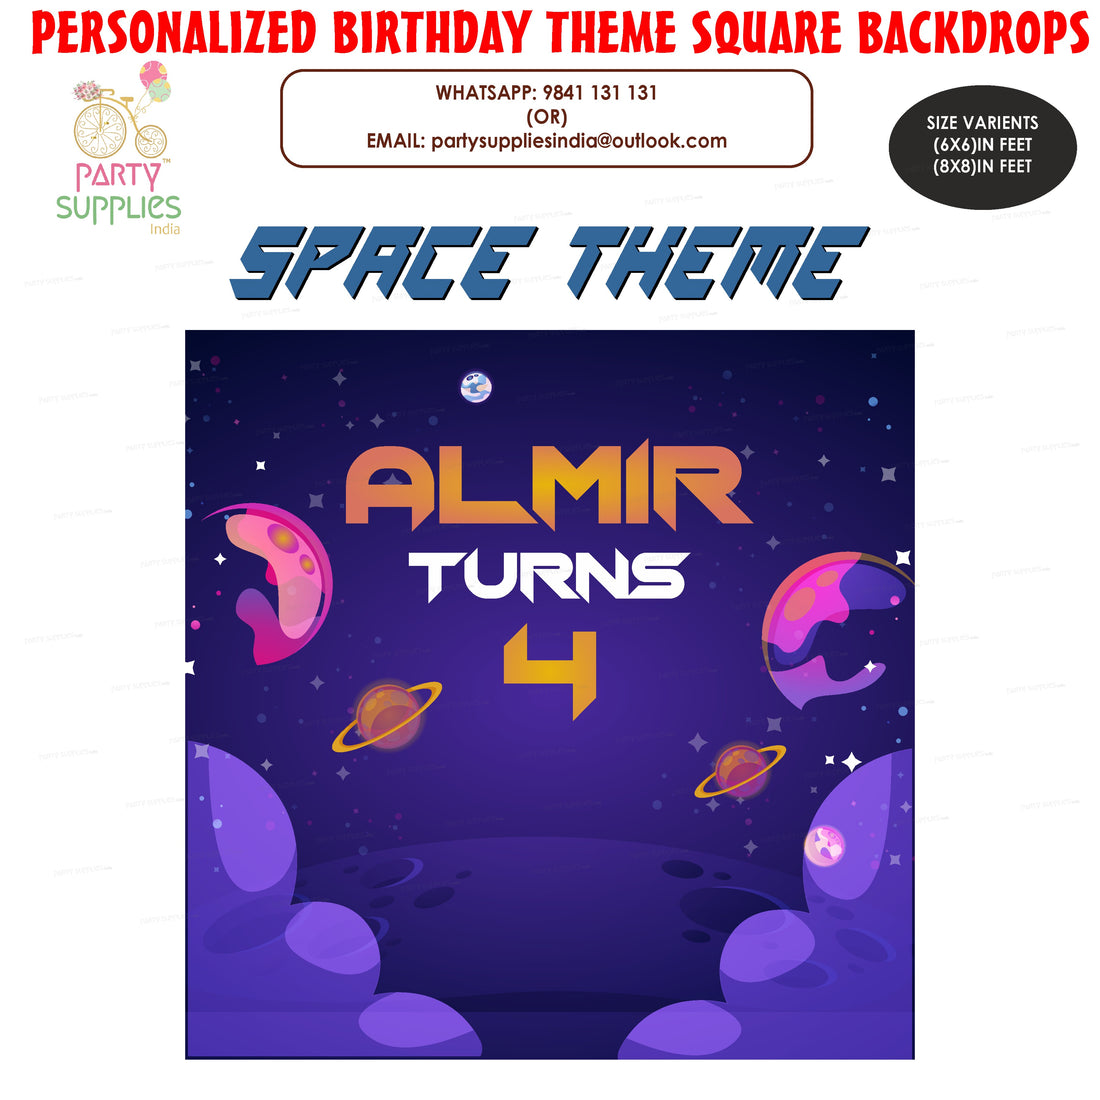 PSI Space Theme Personalized Square Backdrop